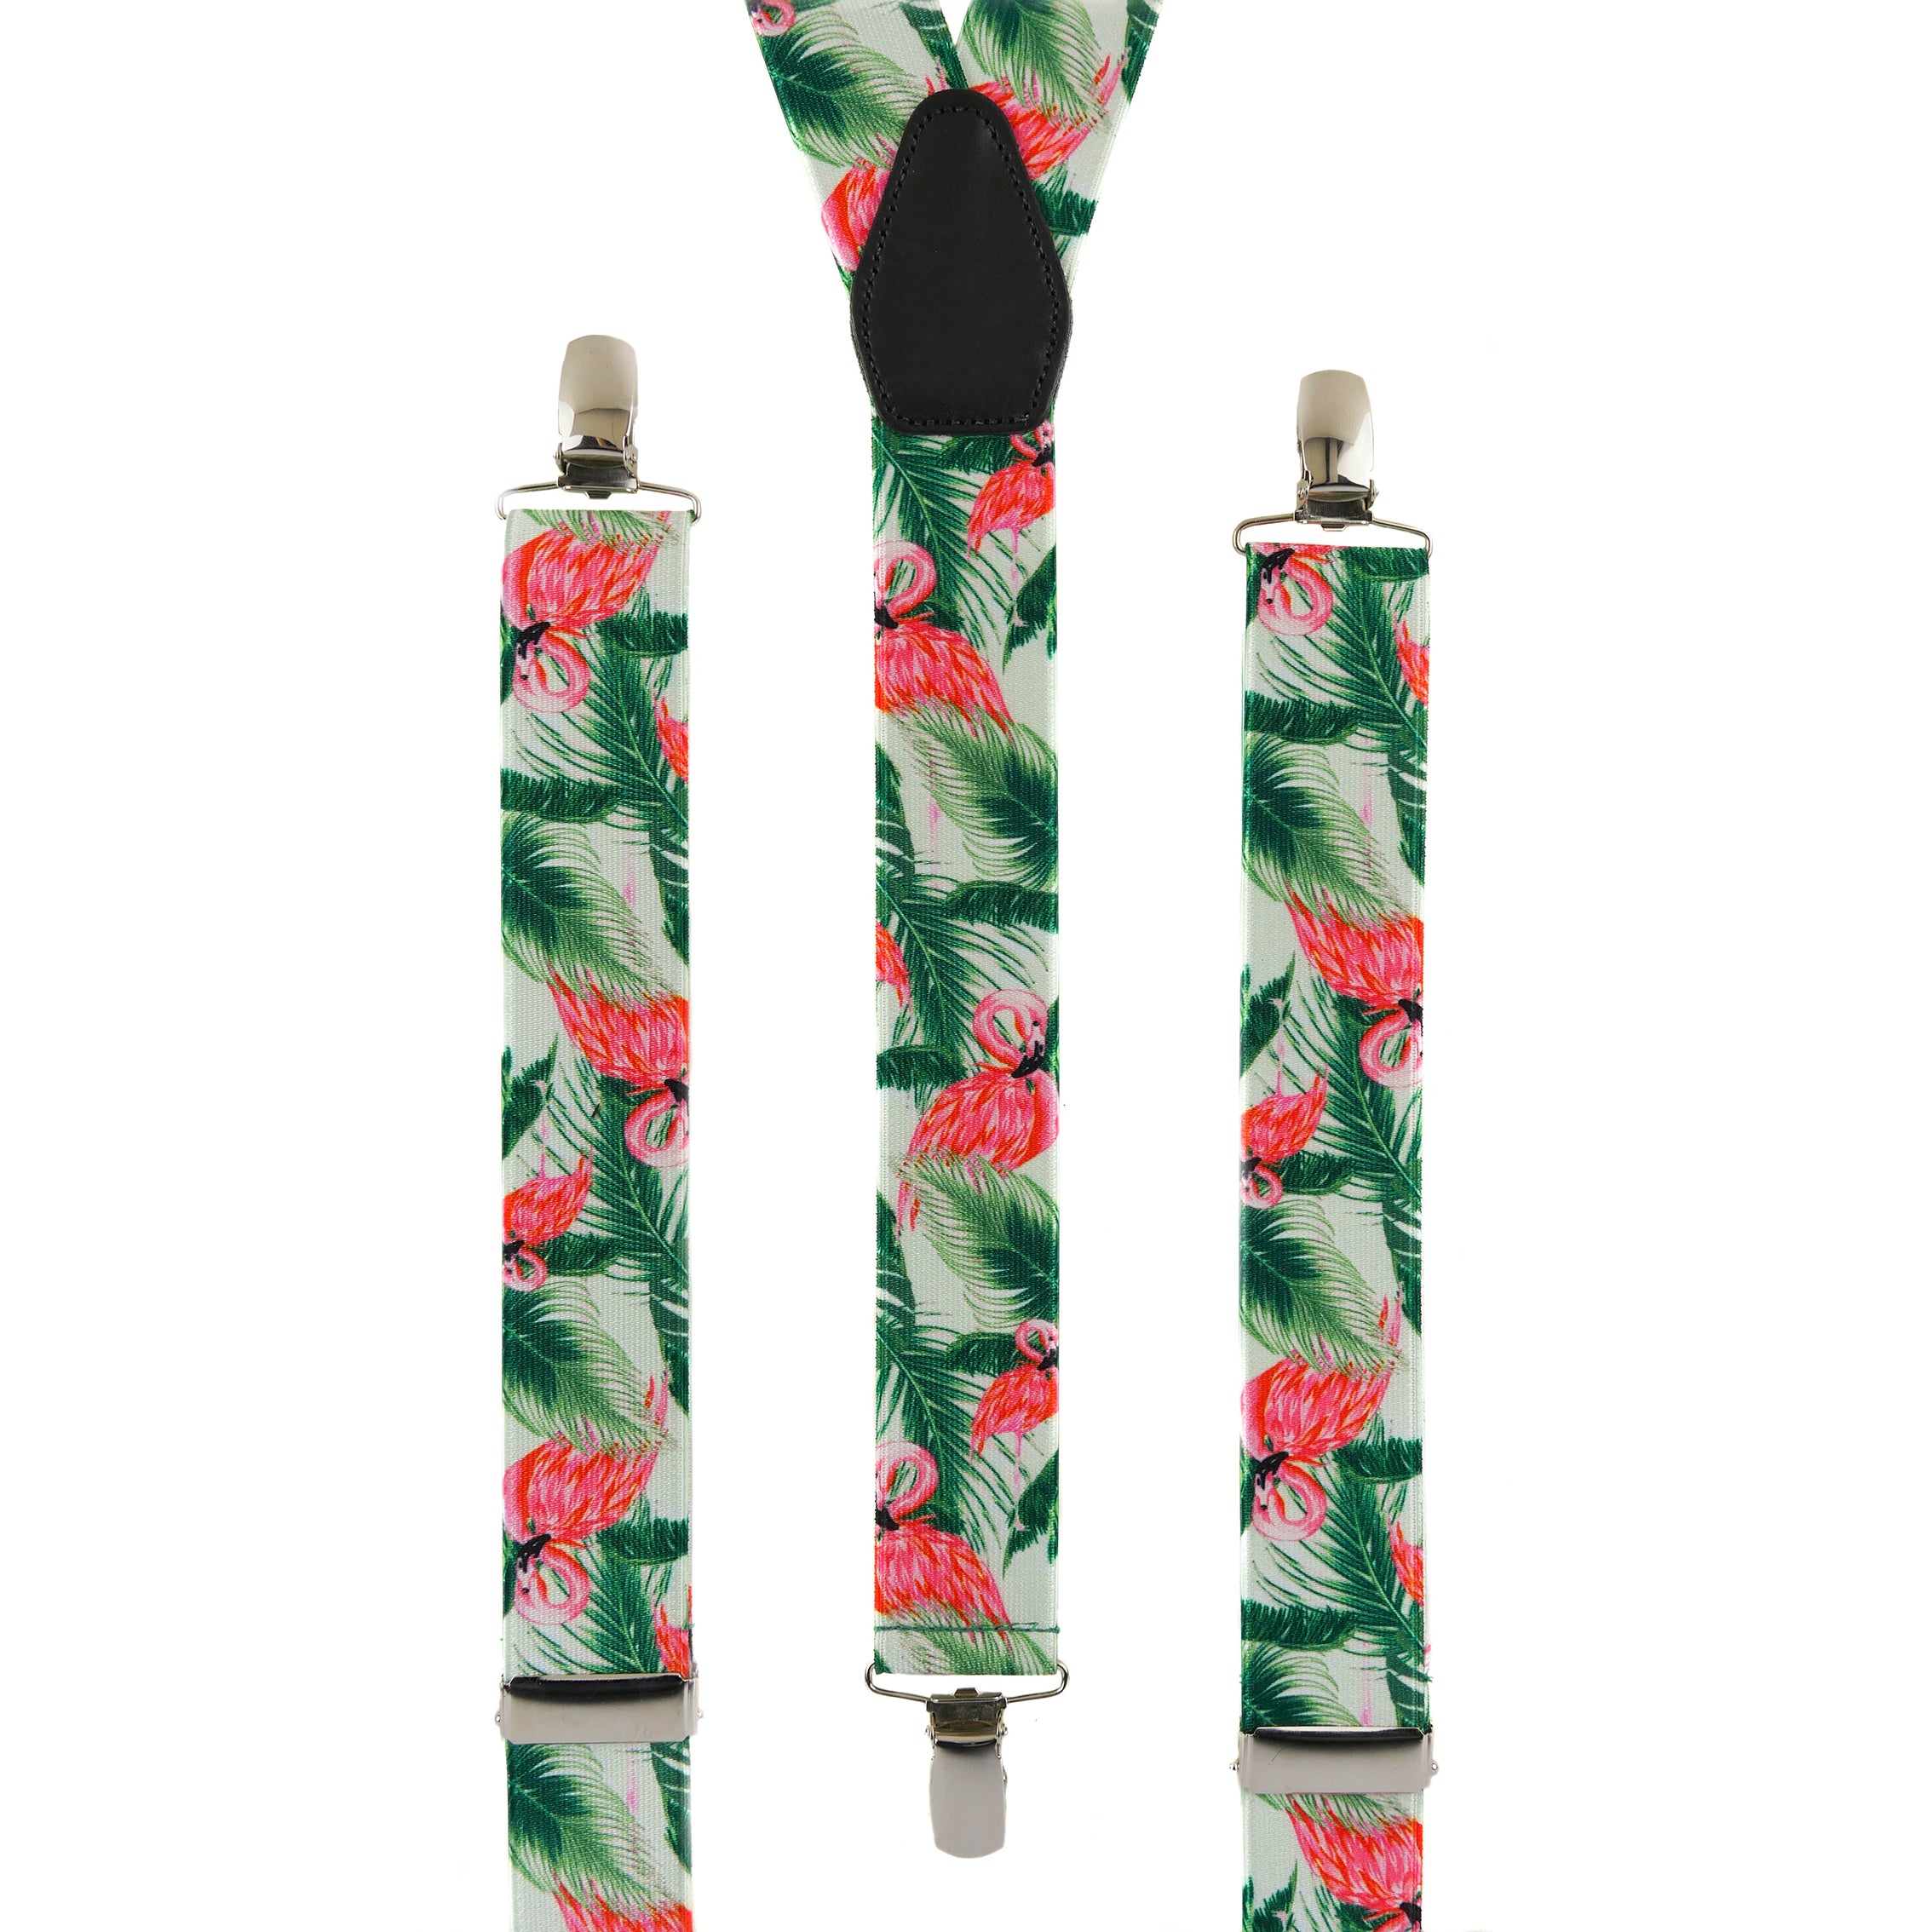 Handmade Trouser Braces, they have a soft satin finish and have a bright, tropical Flamingo Pattern.